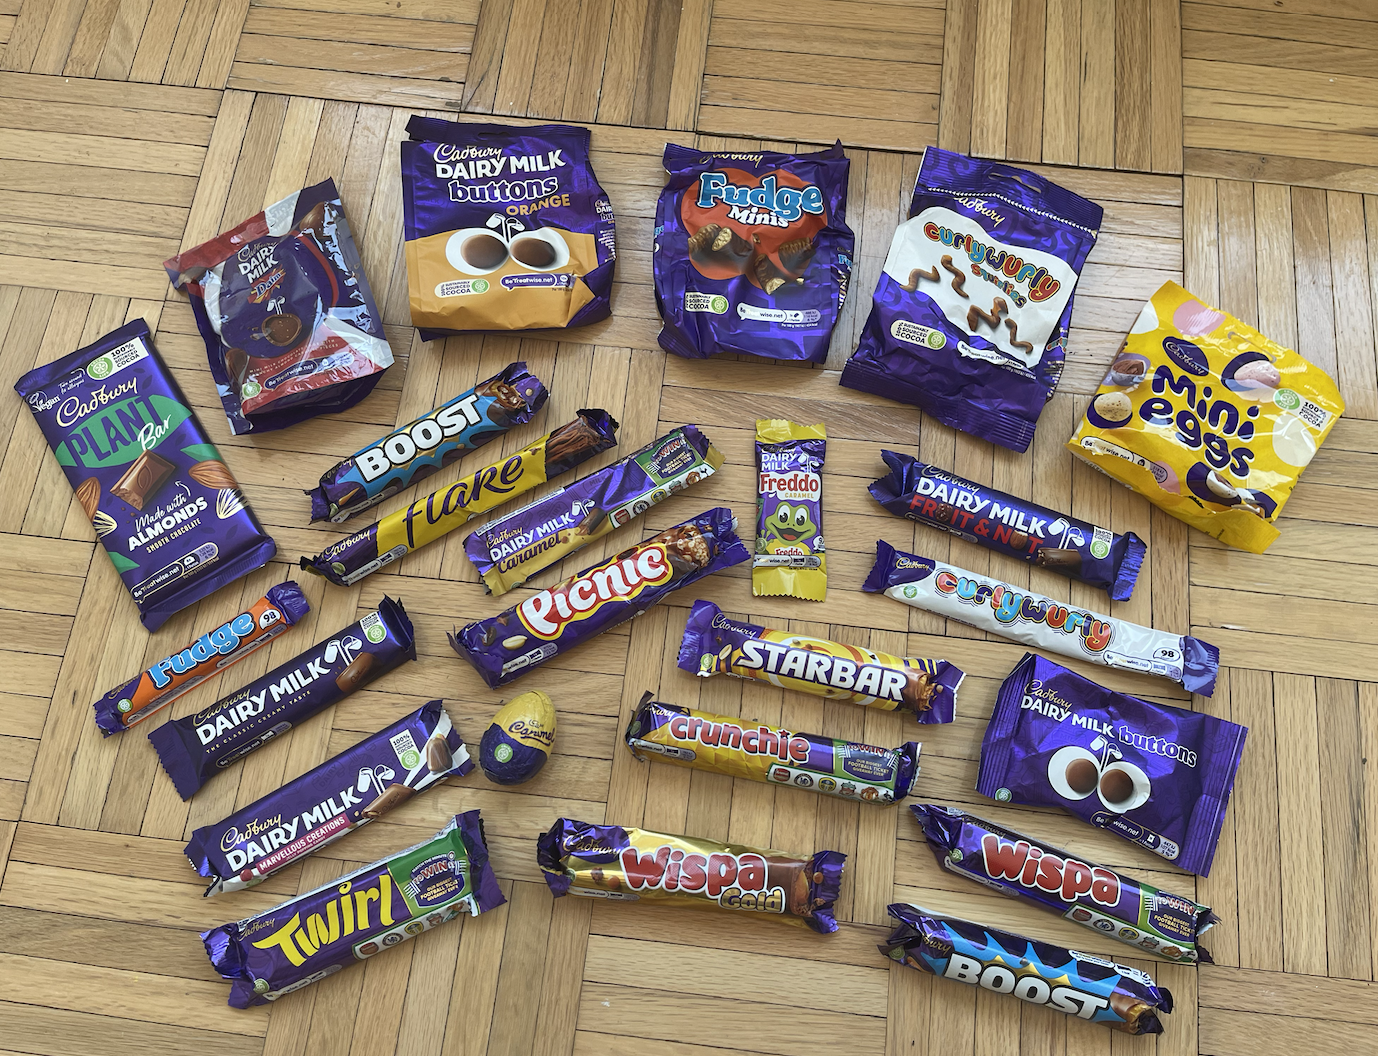 Assorted Cadbury chocolates and snacks laid out on a wooden floor